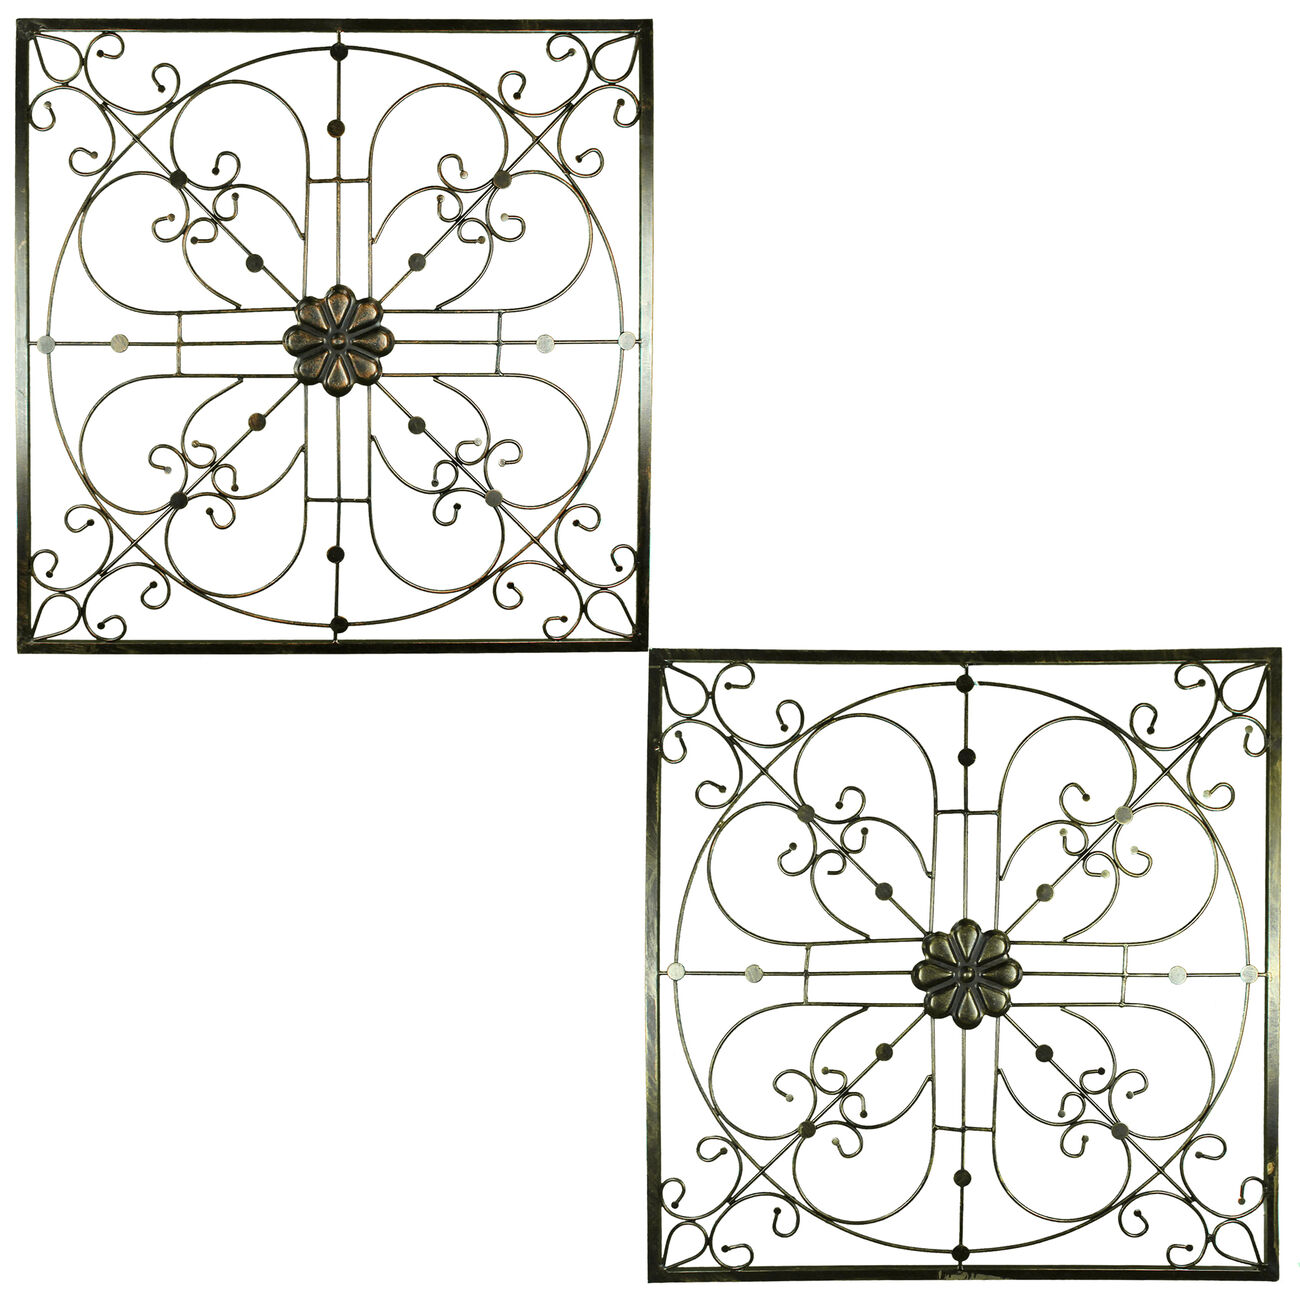 Iron WallDecor with Flower Accent and Squared Framed Design, Assortment of Two, Bronze